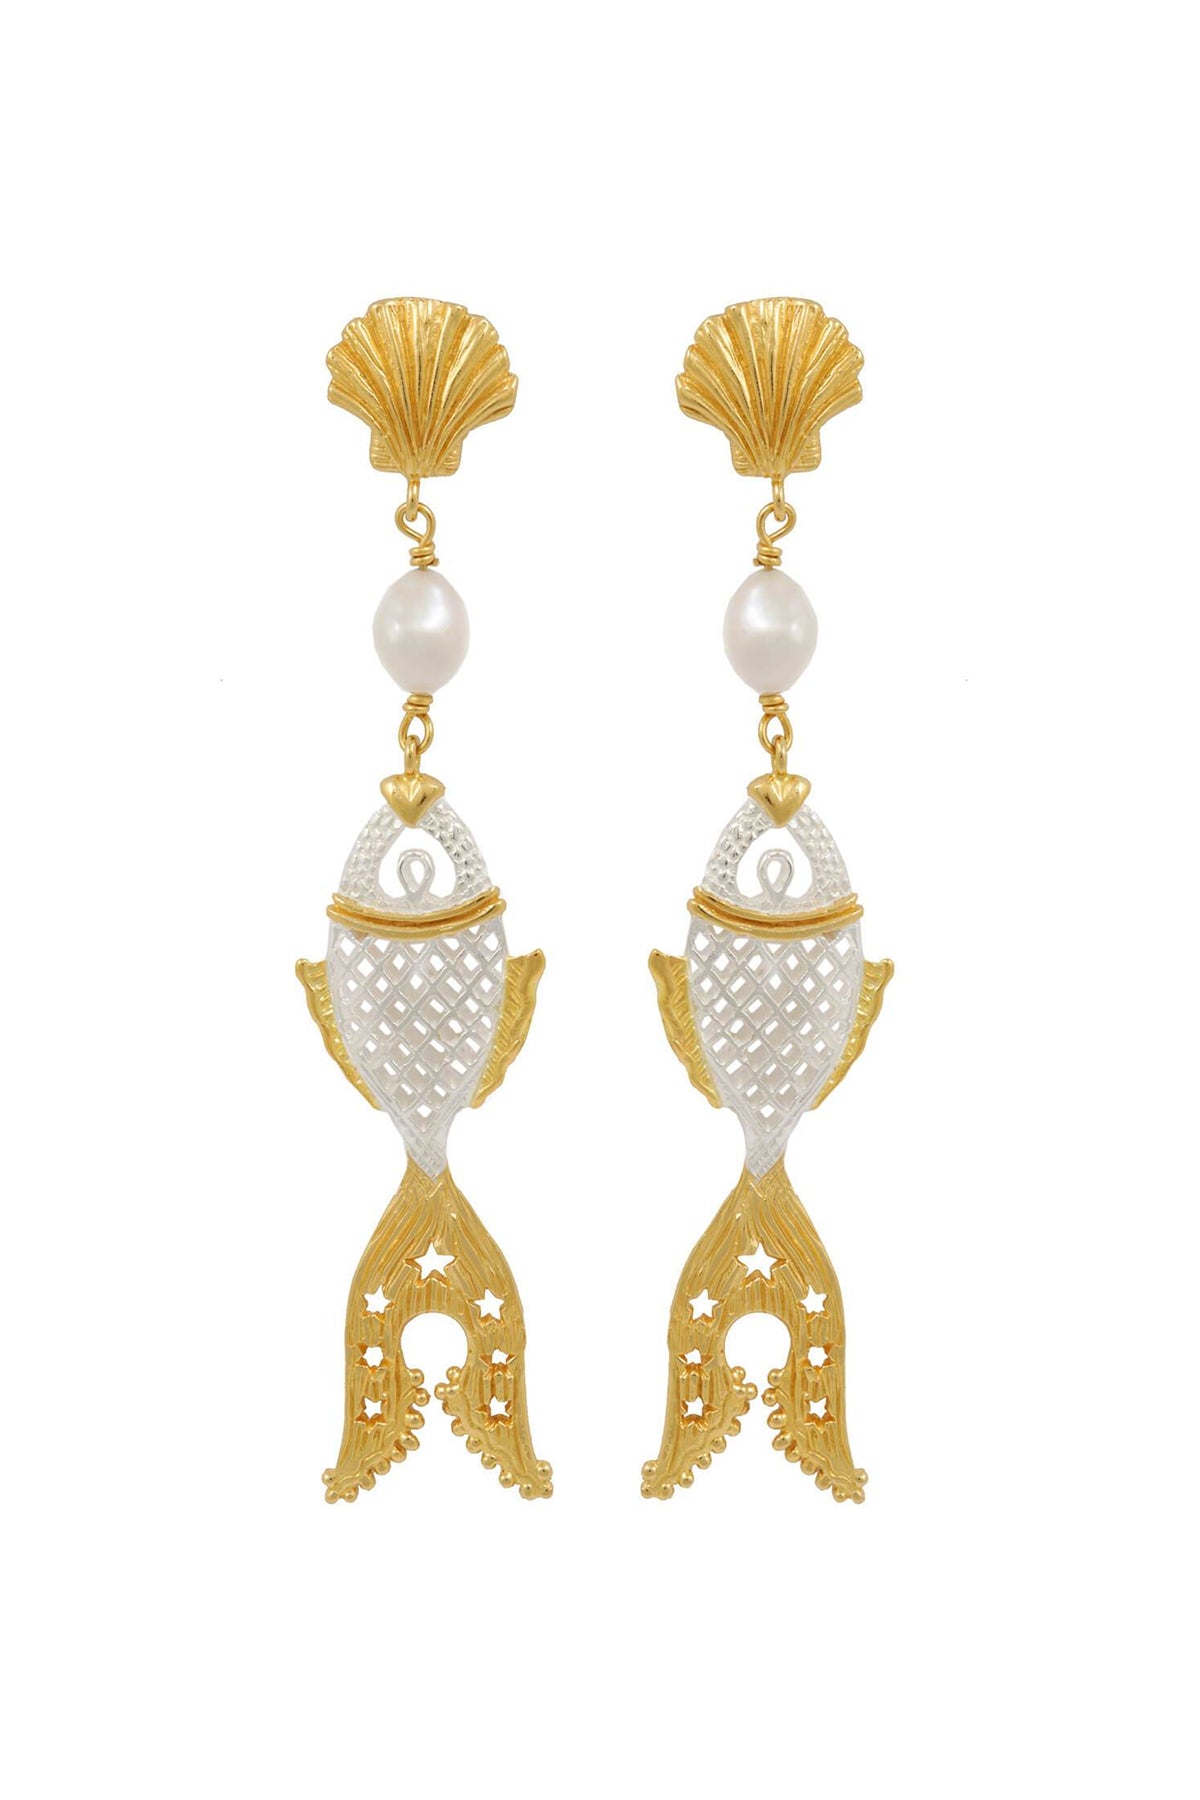 Golden fish with clam and pearl earrings. Silver, partly gold-plated